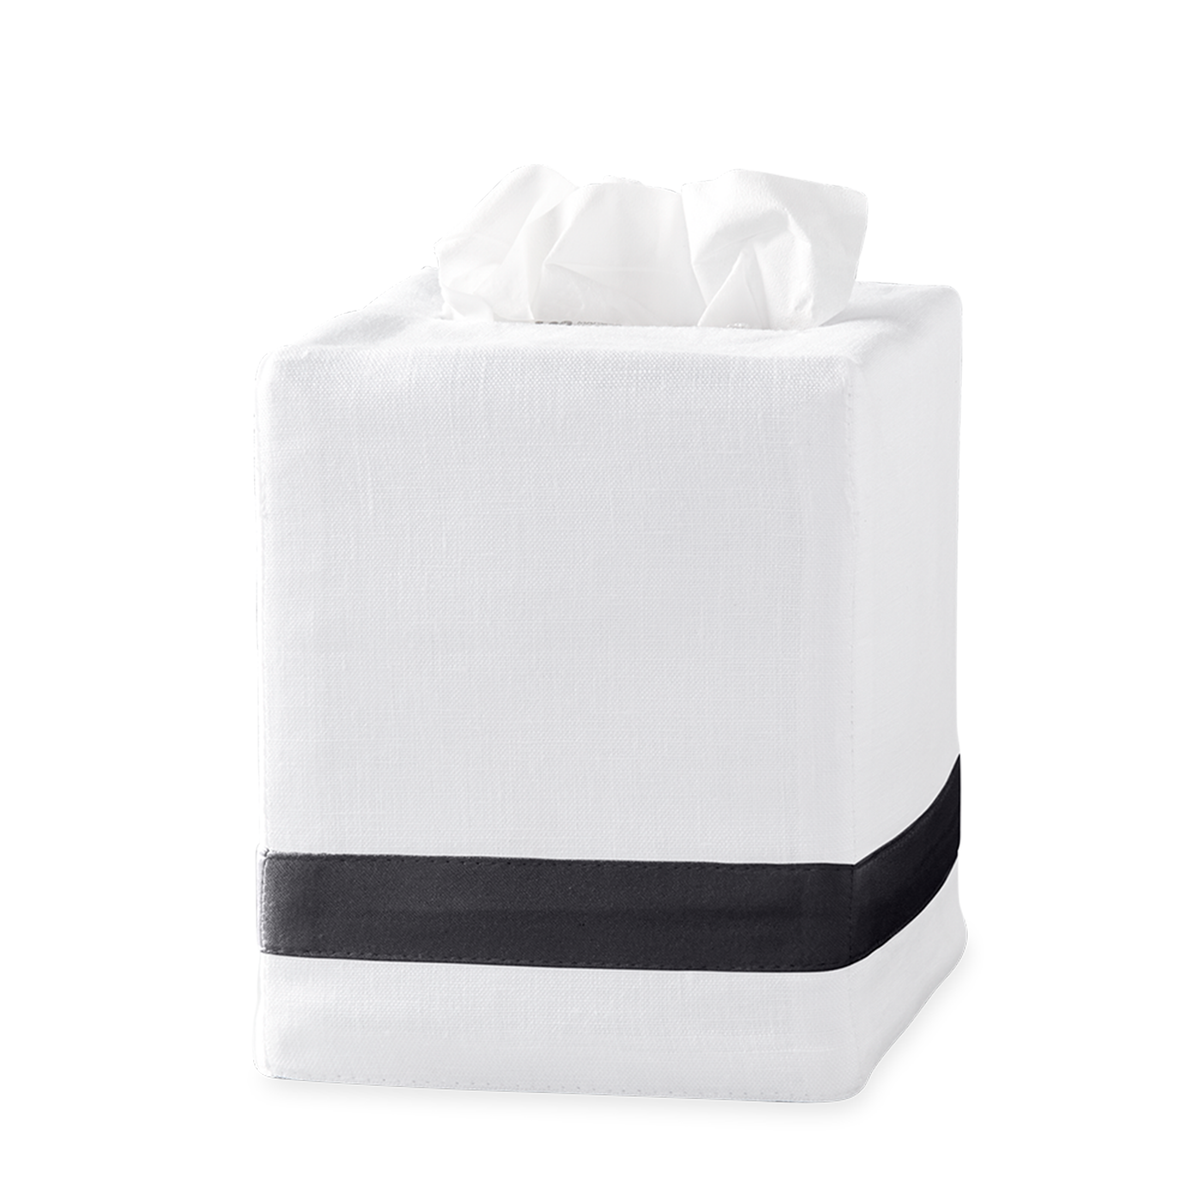 Silo Image of Matouk Lowell Tissue Box Cover in Color Charcoal